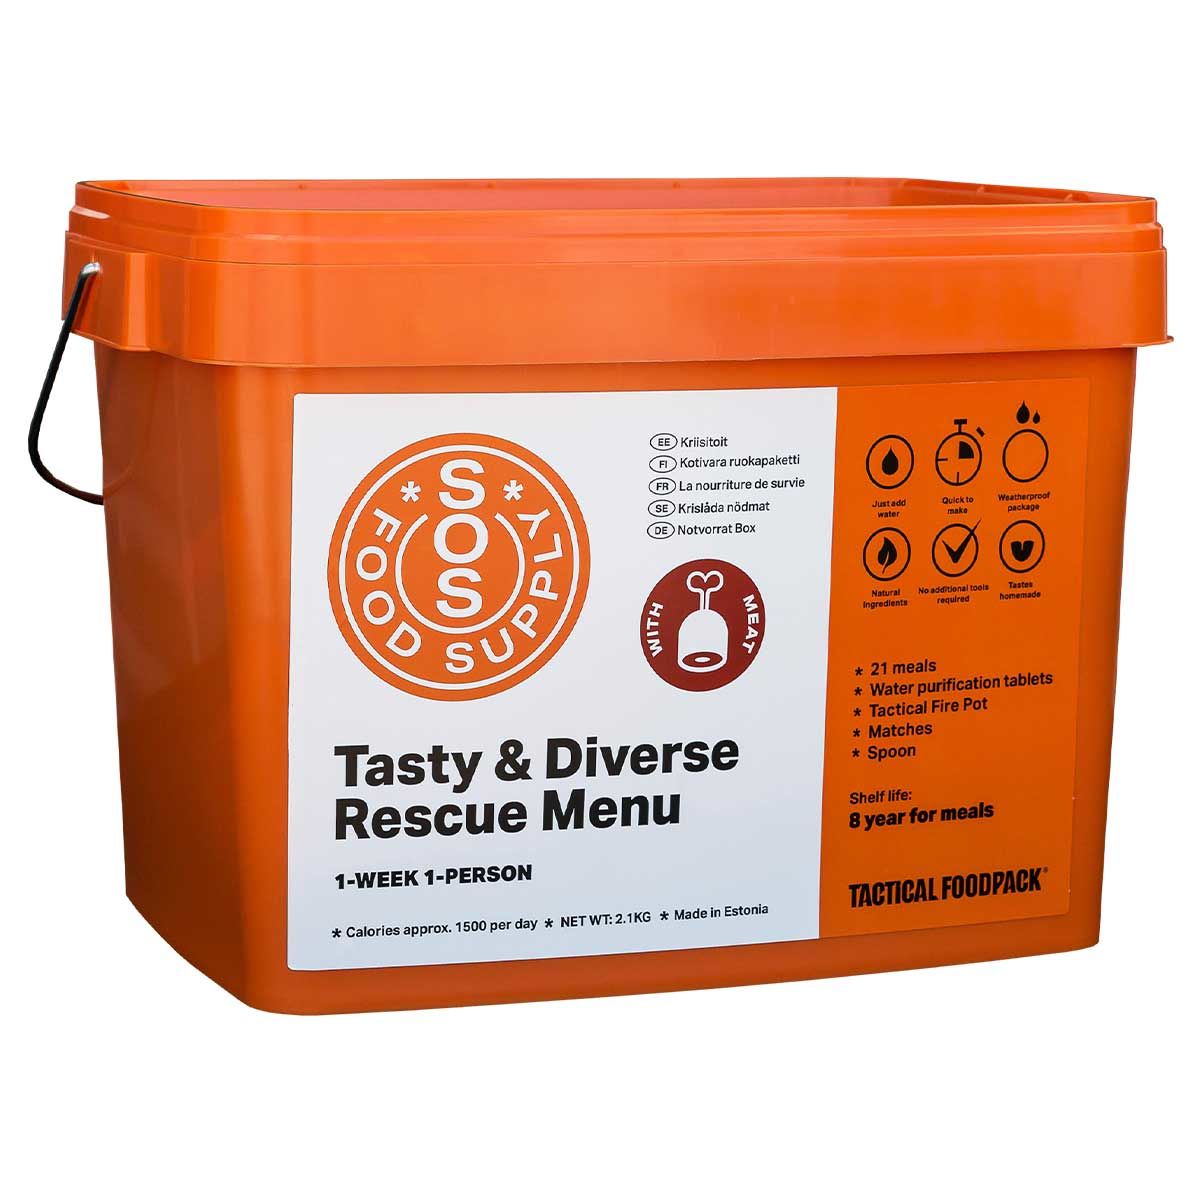 7-days food package - Tactical SOS Food Supply - 8 years